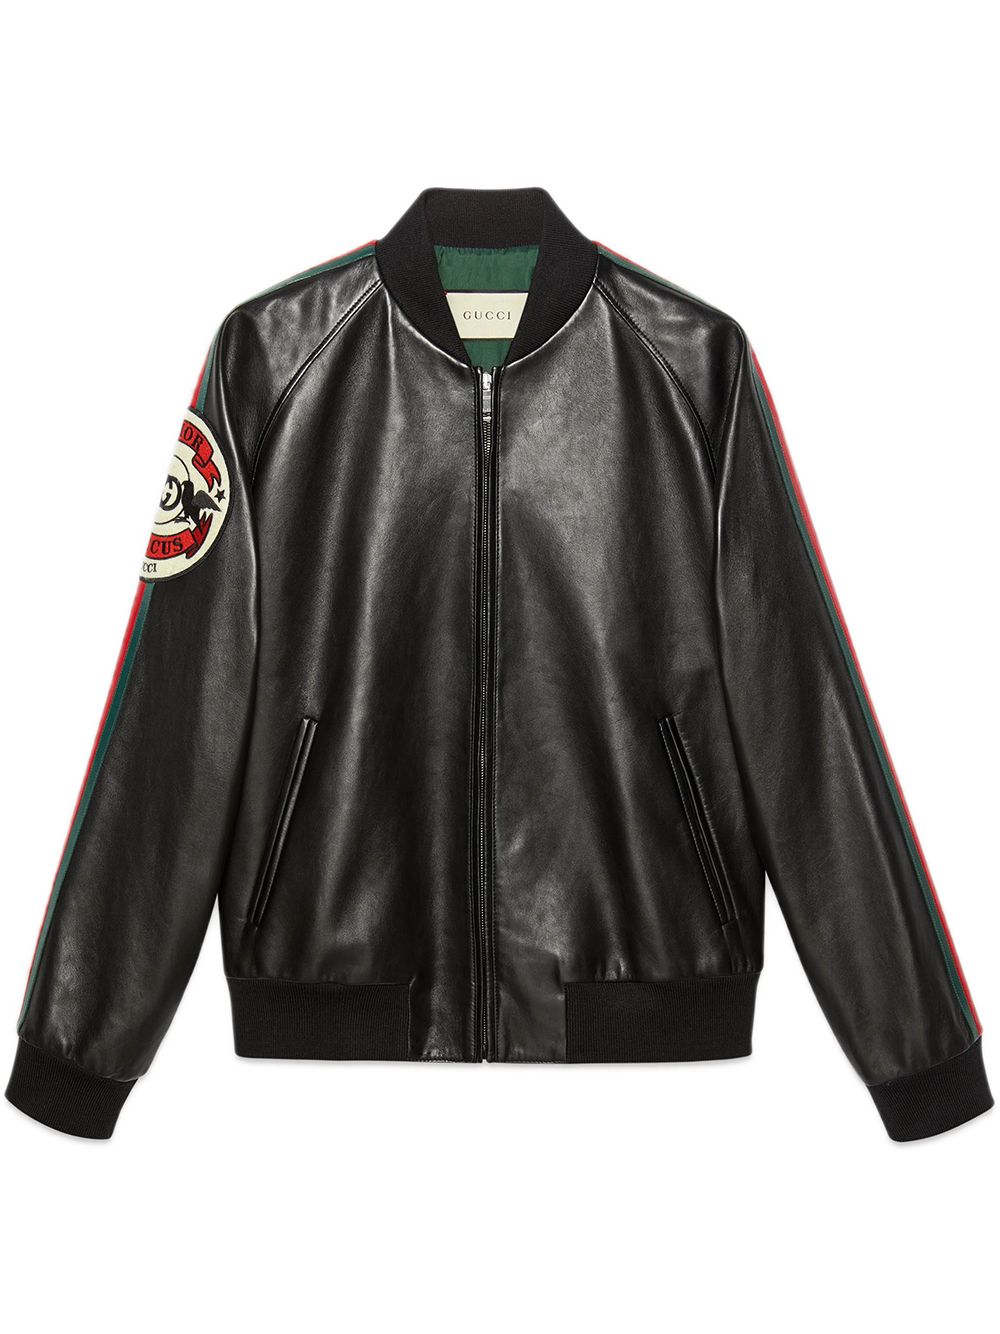 Leather jacket Gucci - Leather bomber jacket Gucci wave patch -  523526XG6491096